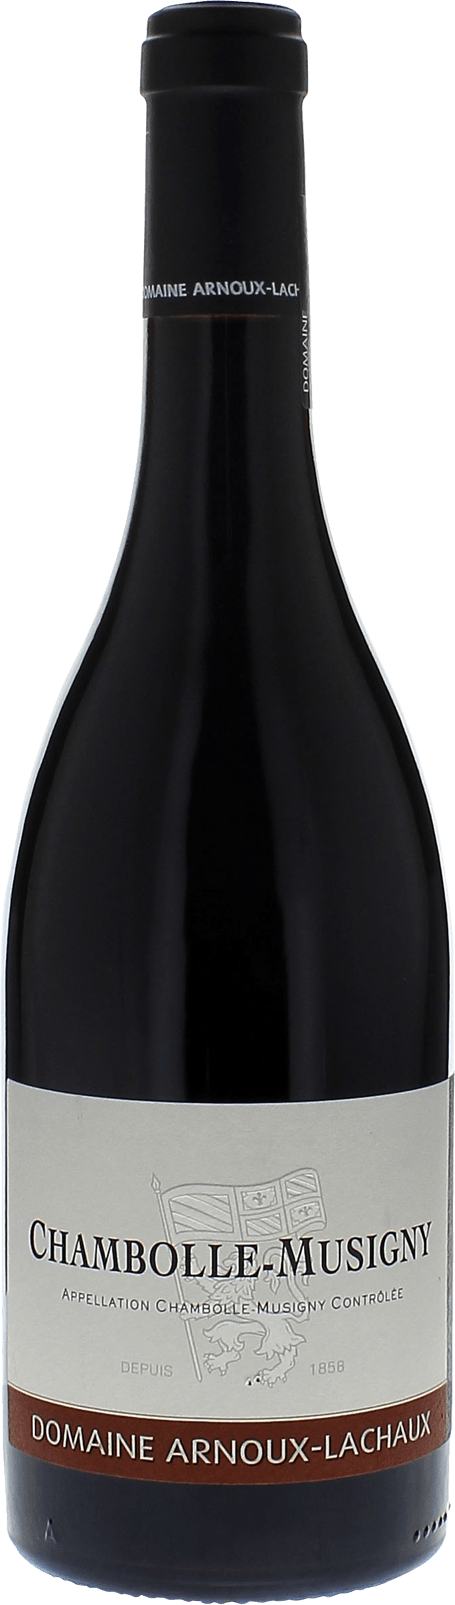 Chambolle musigny 2015 Domaine ARNOUX - LACHAUX, Bourgogne rouge